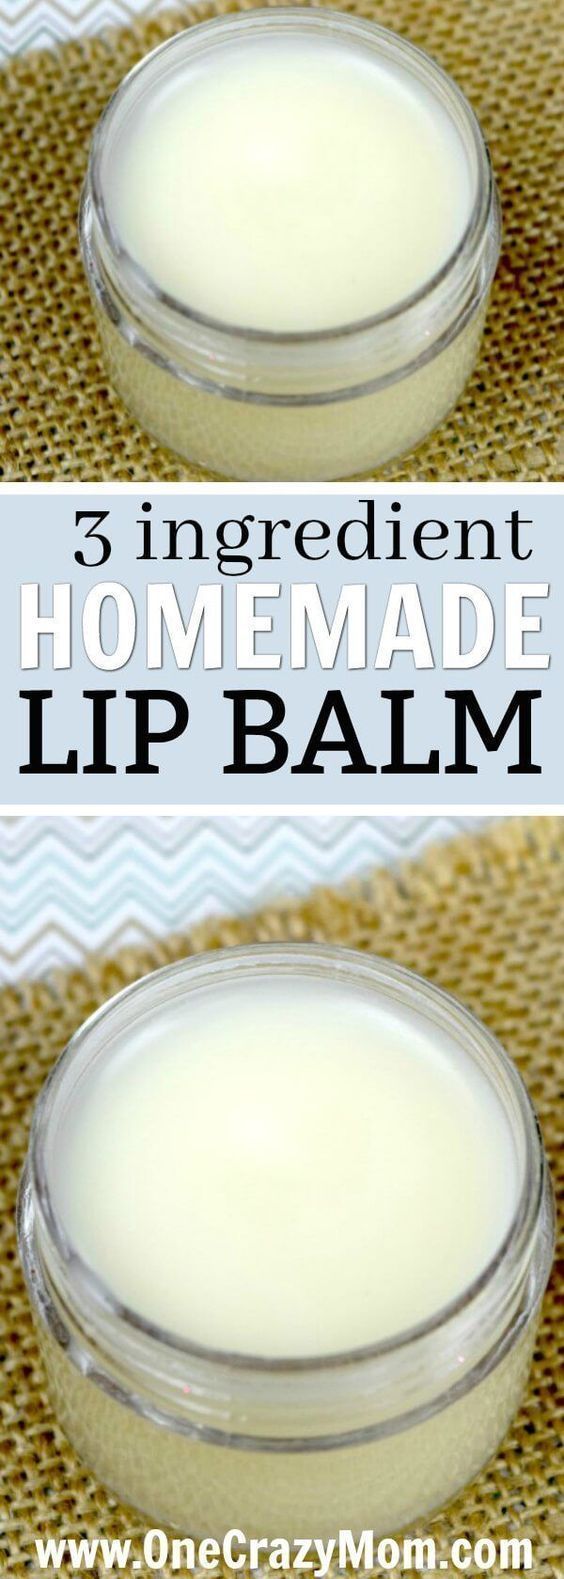 Homemade Lip Balm Recipe - Easy DIY Lip Balm with only 3 Ingredients! -   17 skin care Coconut Oil lip balm ideas